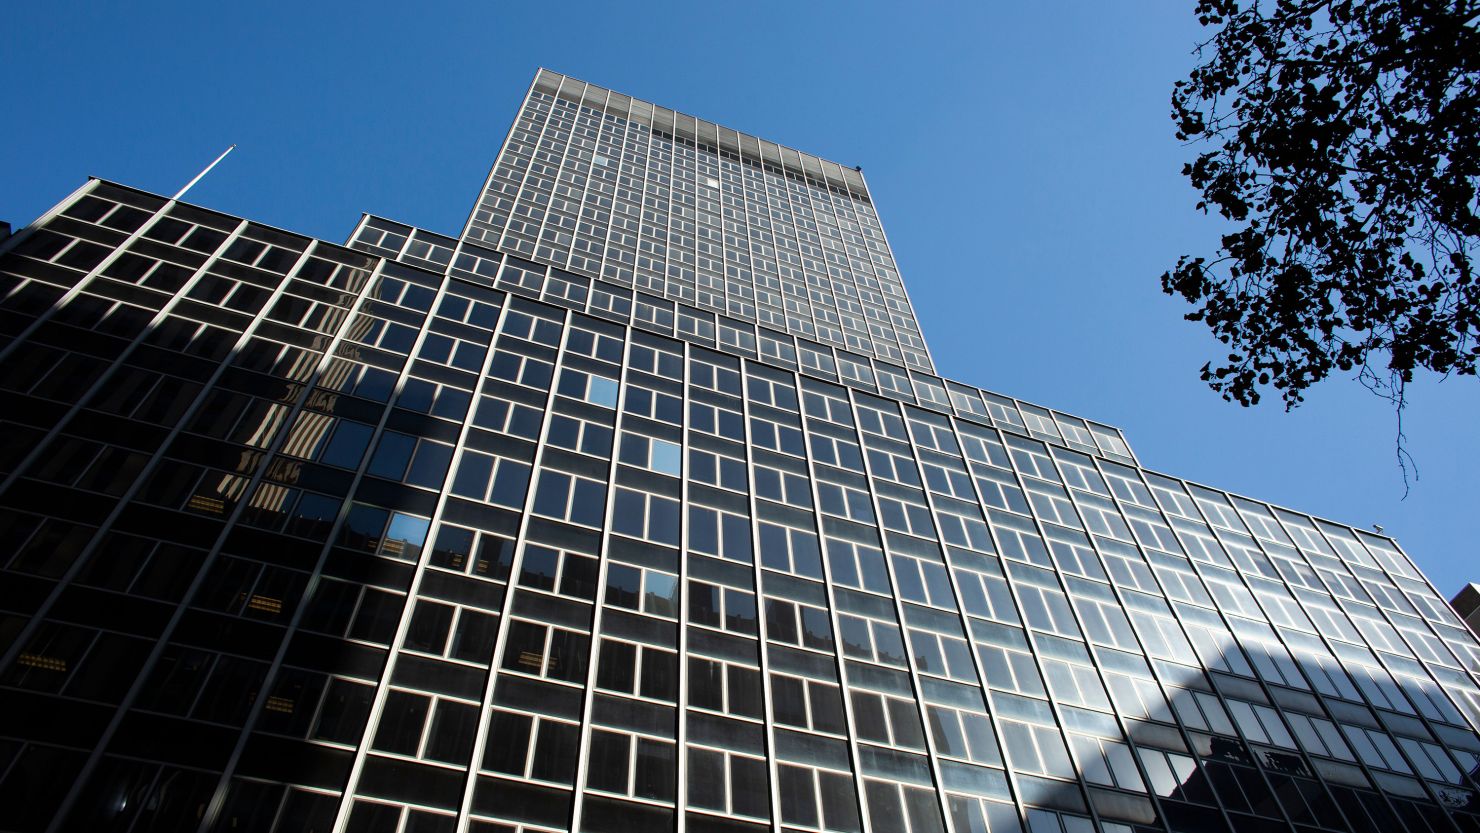 The former world headquarters of Pfizer in New York’s Midtown will be converted into roughly 1,500 new rental apartments. The former Pfizer office is seen here on November 9, 2020.